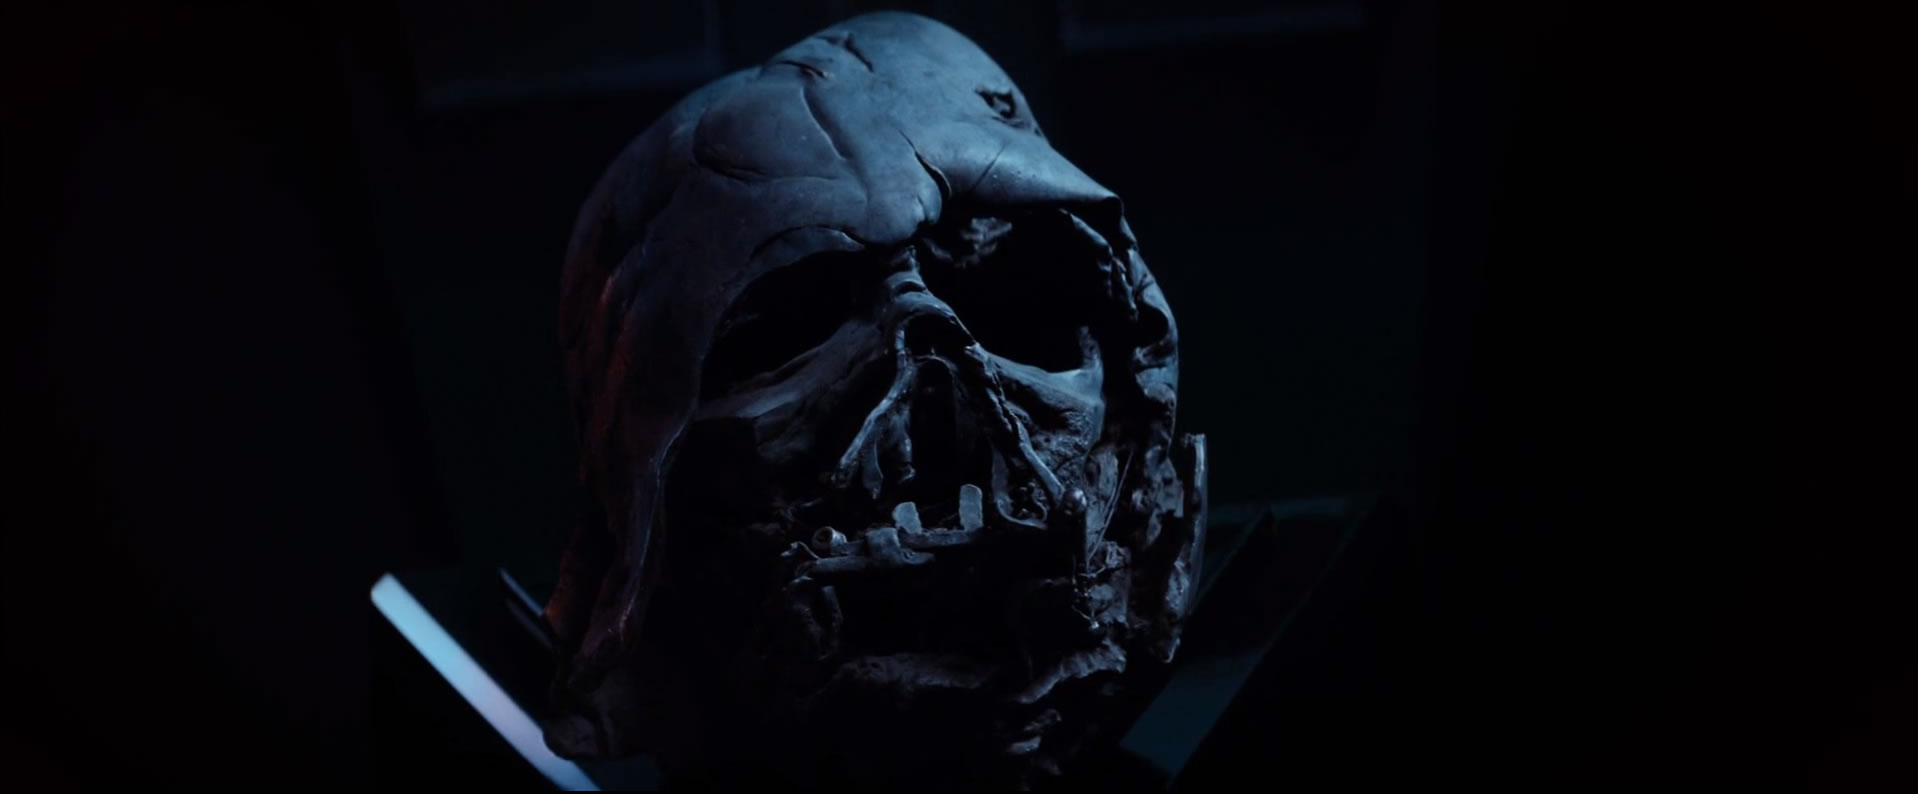 Star Wars: The Force Awakens - Why Is Kylo Ren Obsessed With Darth Vader?